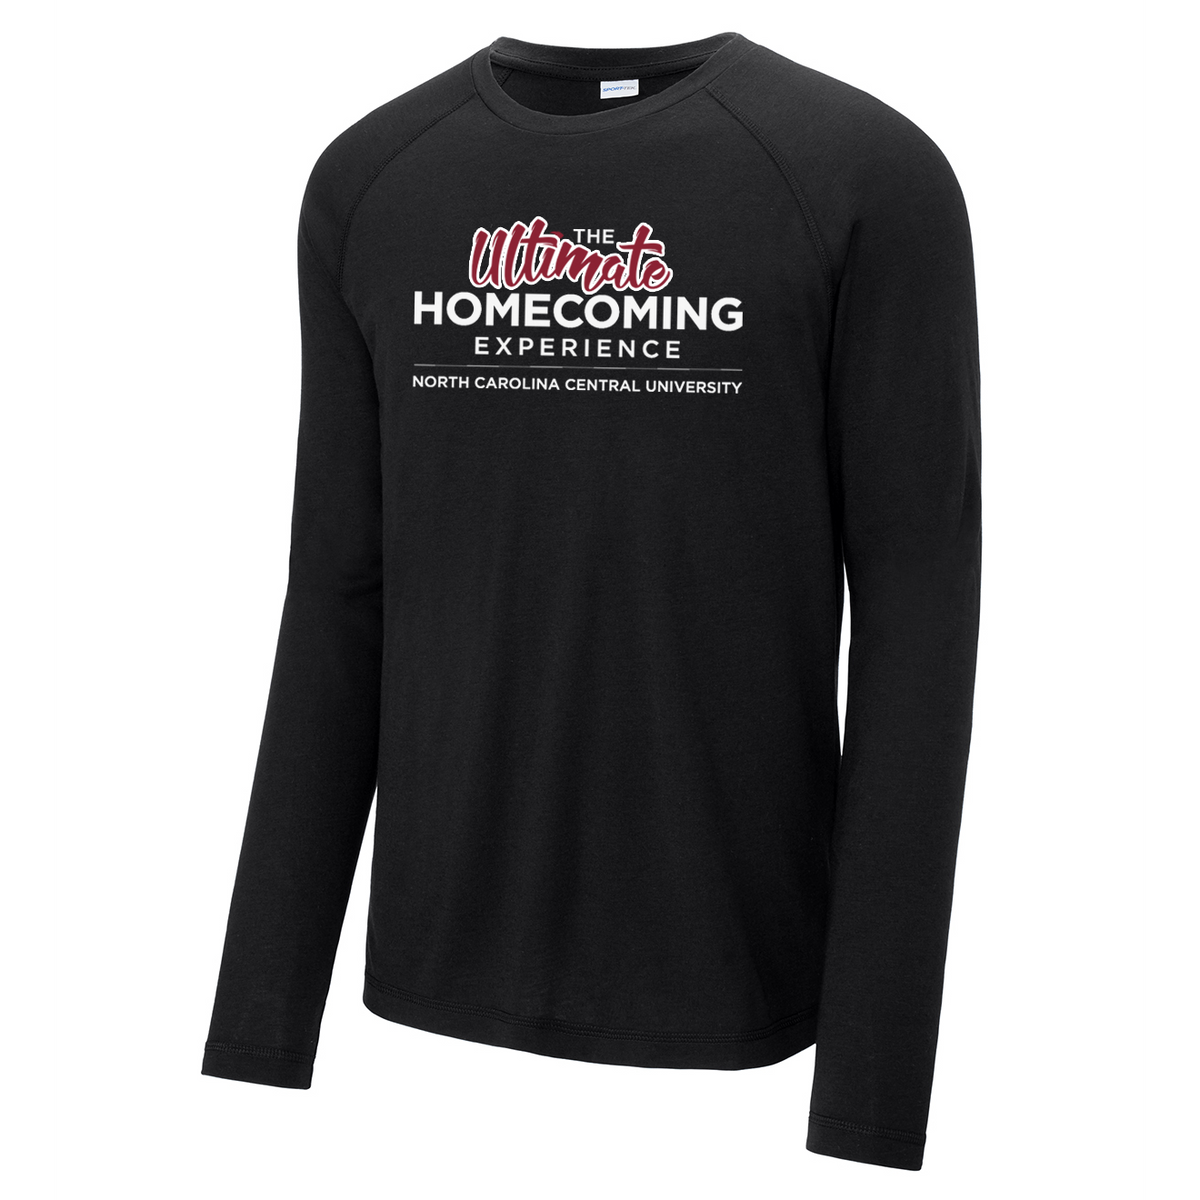 NC Central University Homecoming Long Sleeve Raglan CottonTouch